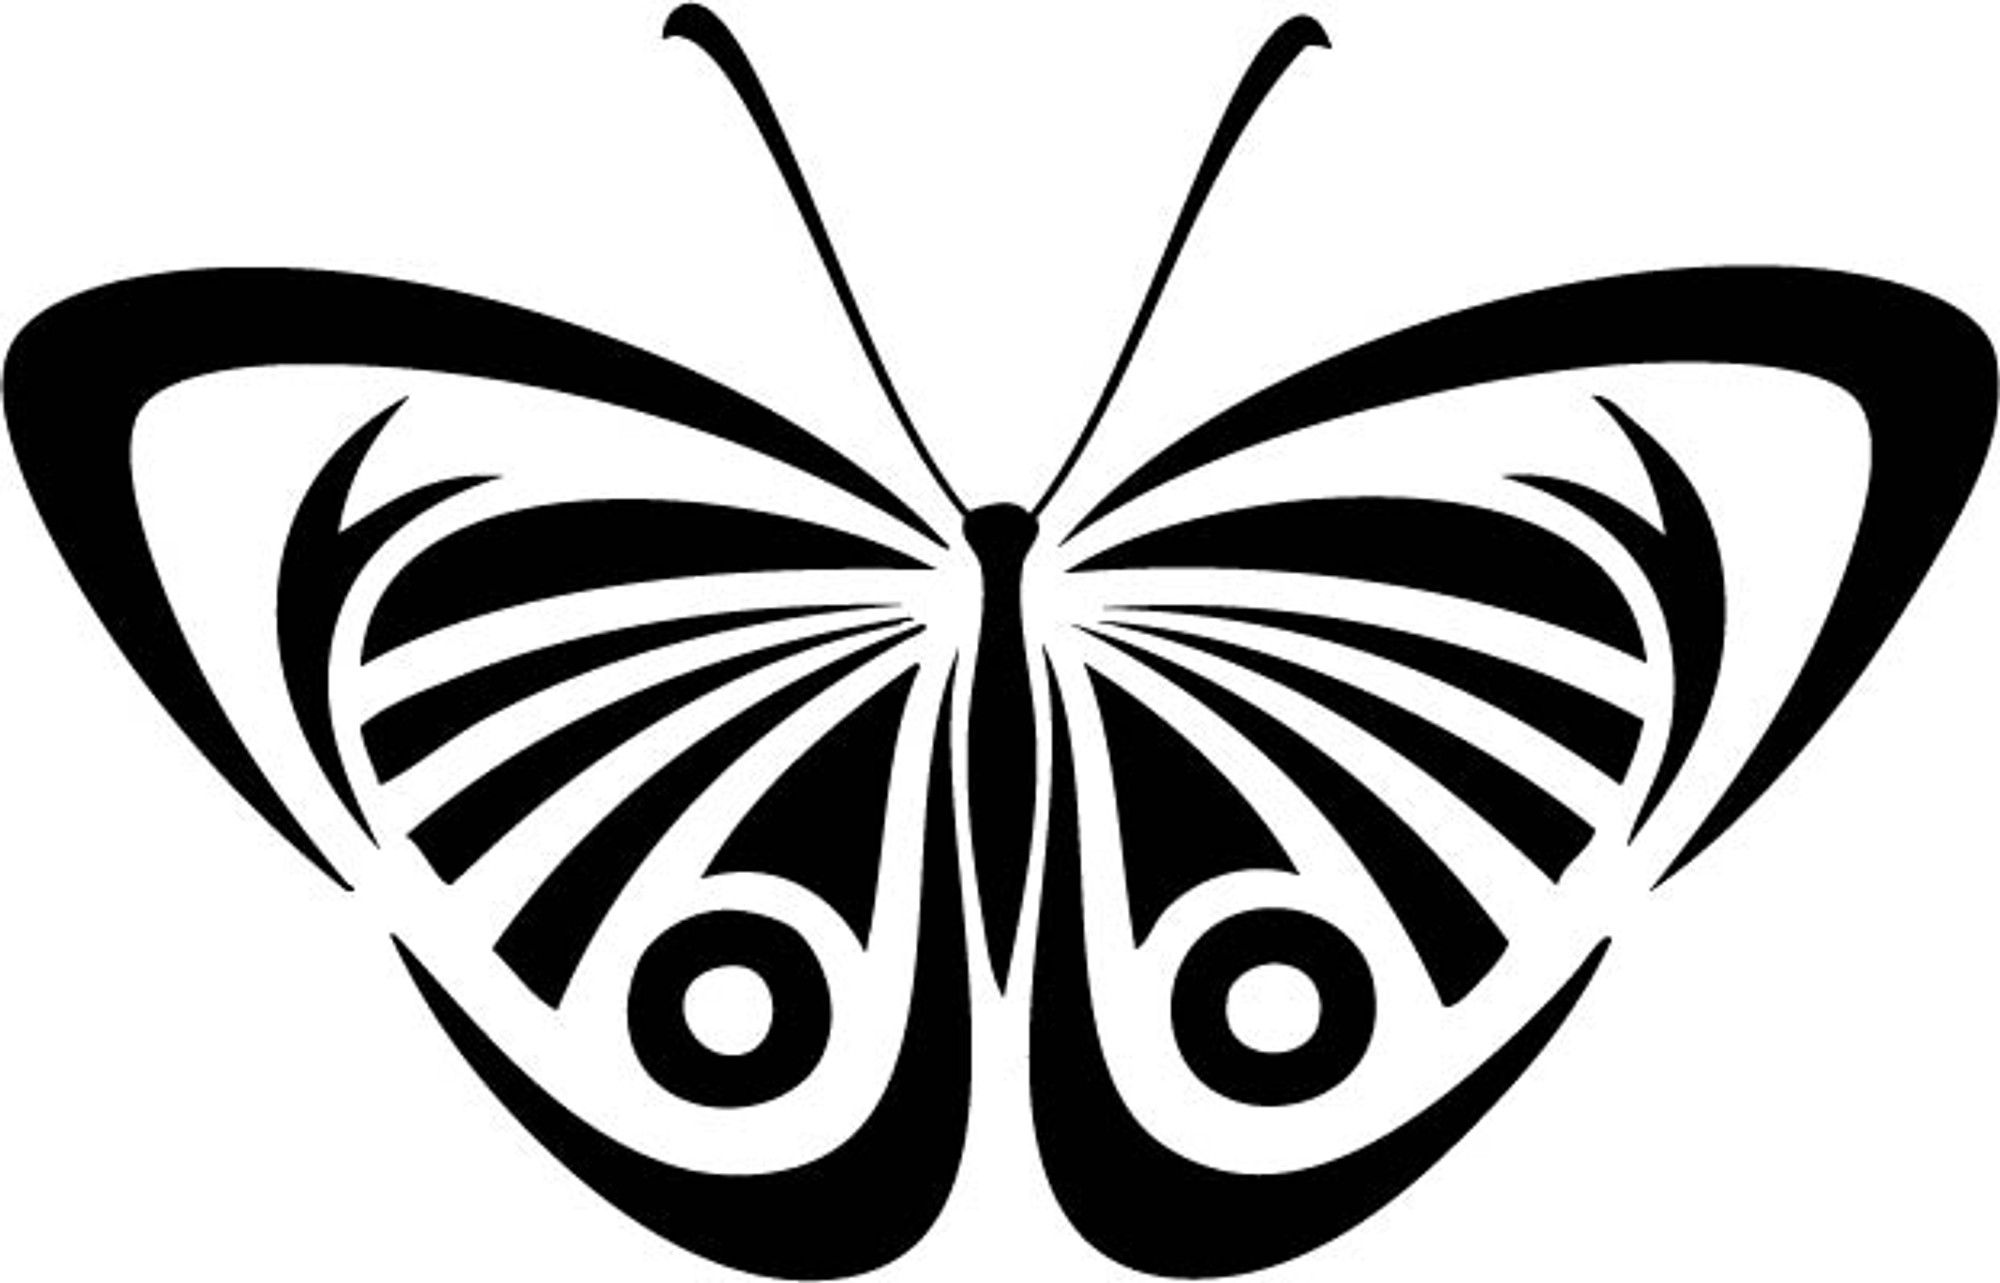 Insect Car Decals - Car Stickers | Butterfly Car Decal 13 | AnyDecals.com